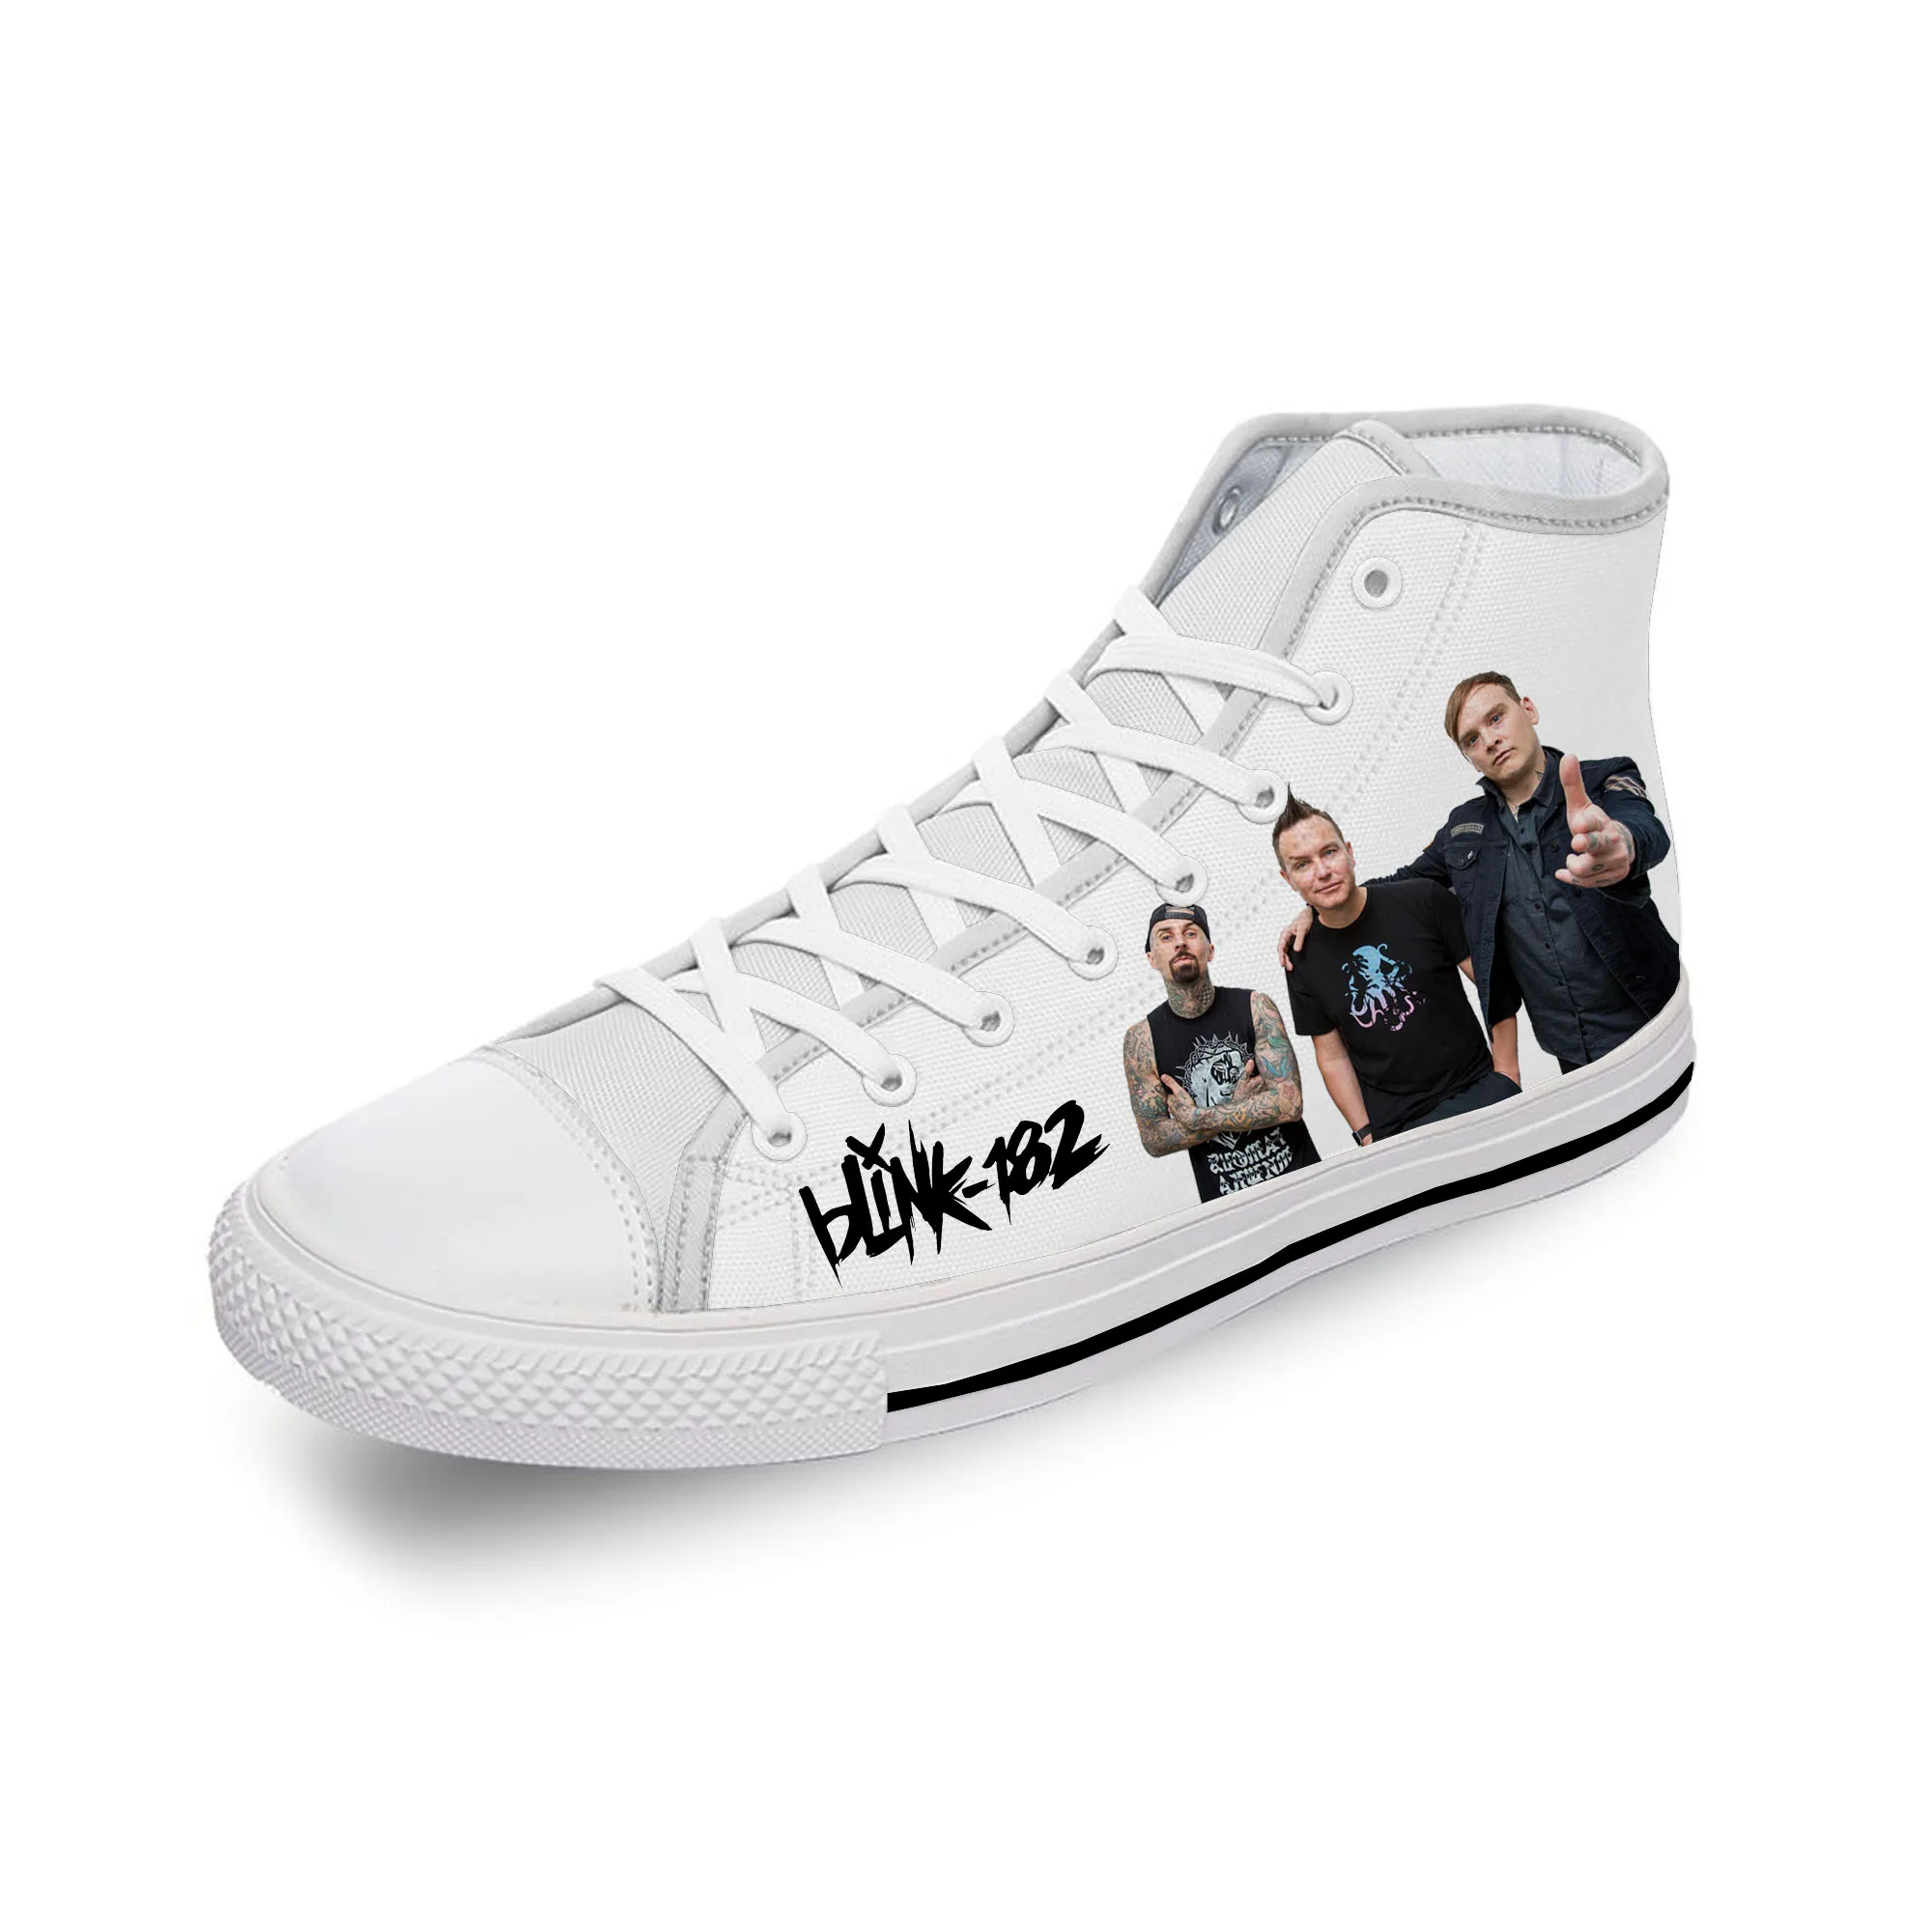 Blink 128 High Top Sneakers Mens Womens Teenager Casual Shoes Canvas Running Shoes 3D Print Cosplay Breathable Lightweight shoe